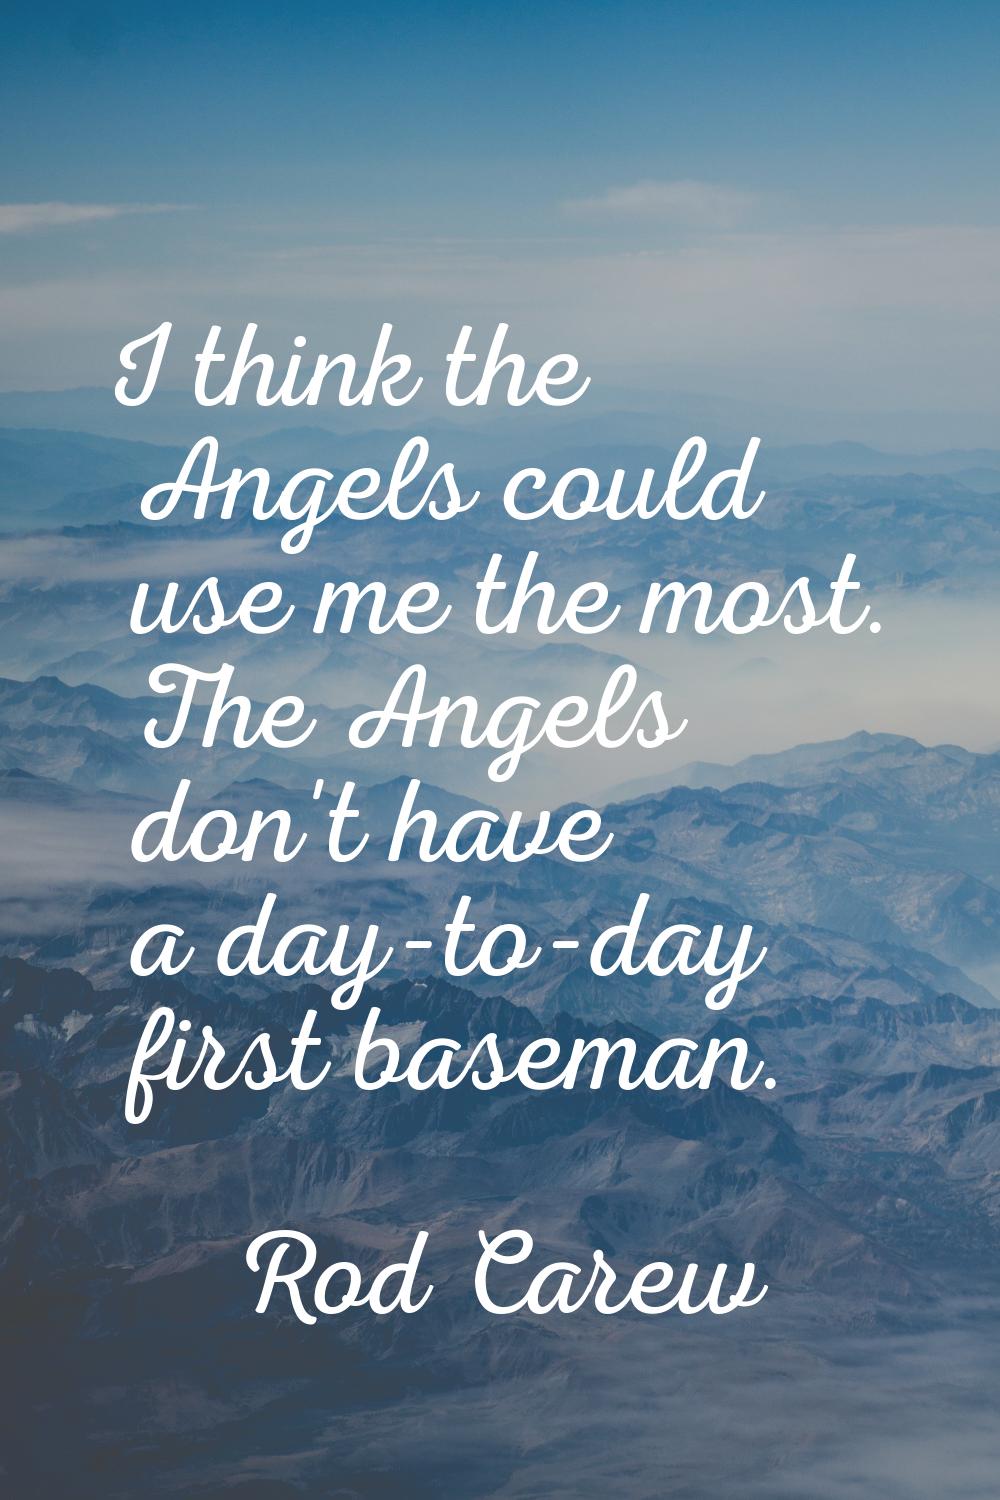 I think the Angels could use me the most. The Angels don't have a day-to-day first baseman.